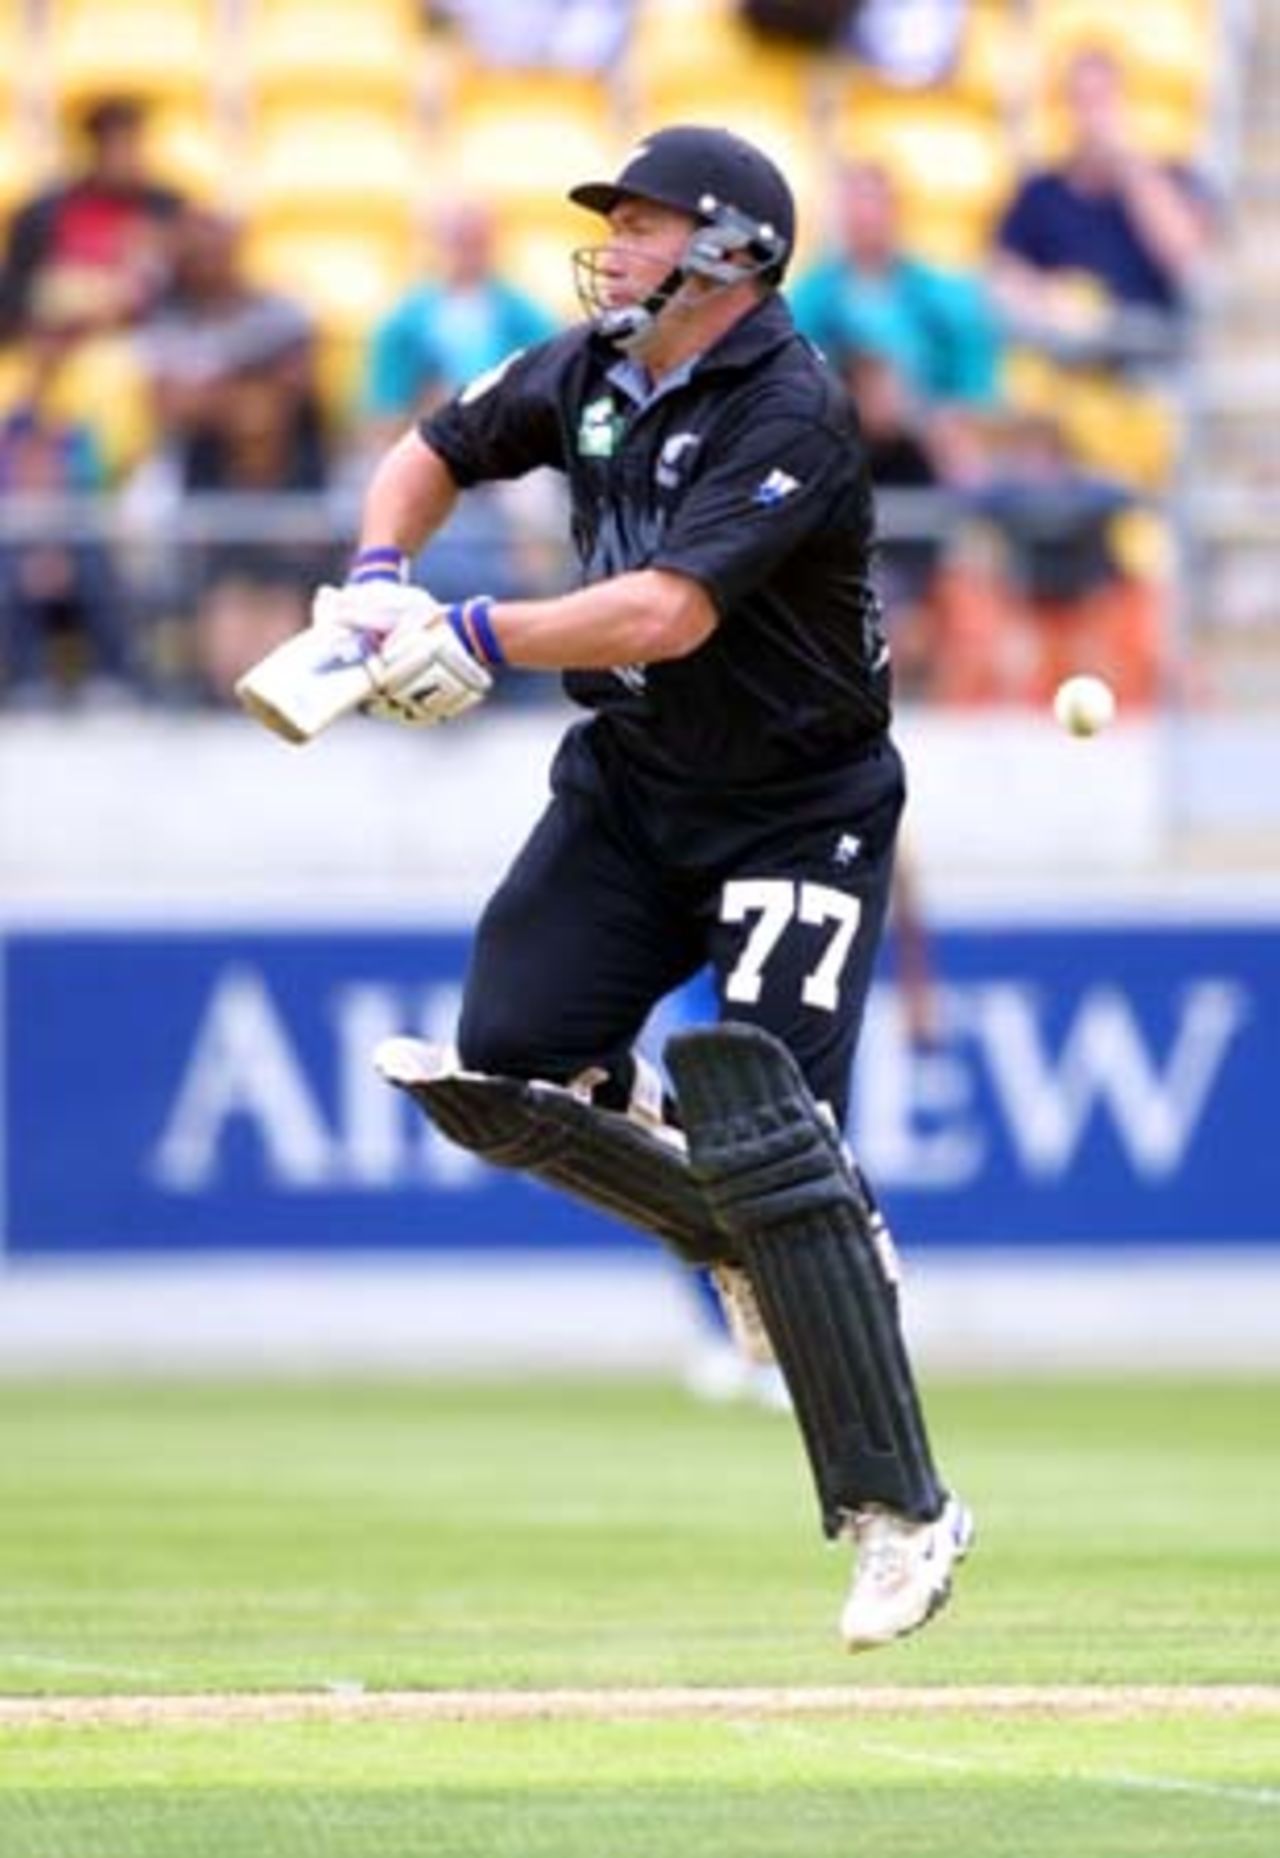 New Zealand batsman Roger Twose jumps at the crease in attempting to defend a quick rising short-pitched delivery. Twose later retired hurt for 11 after injuring his left thumb in a mid-pitch collision with batting partner Craig McMillan. 2nd One-Day International: New Zealand v Sri Lanka at WestpacTrust Stadium, Wellington, 3 February 2001.